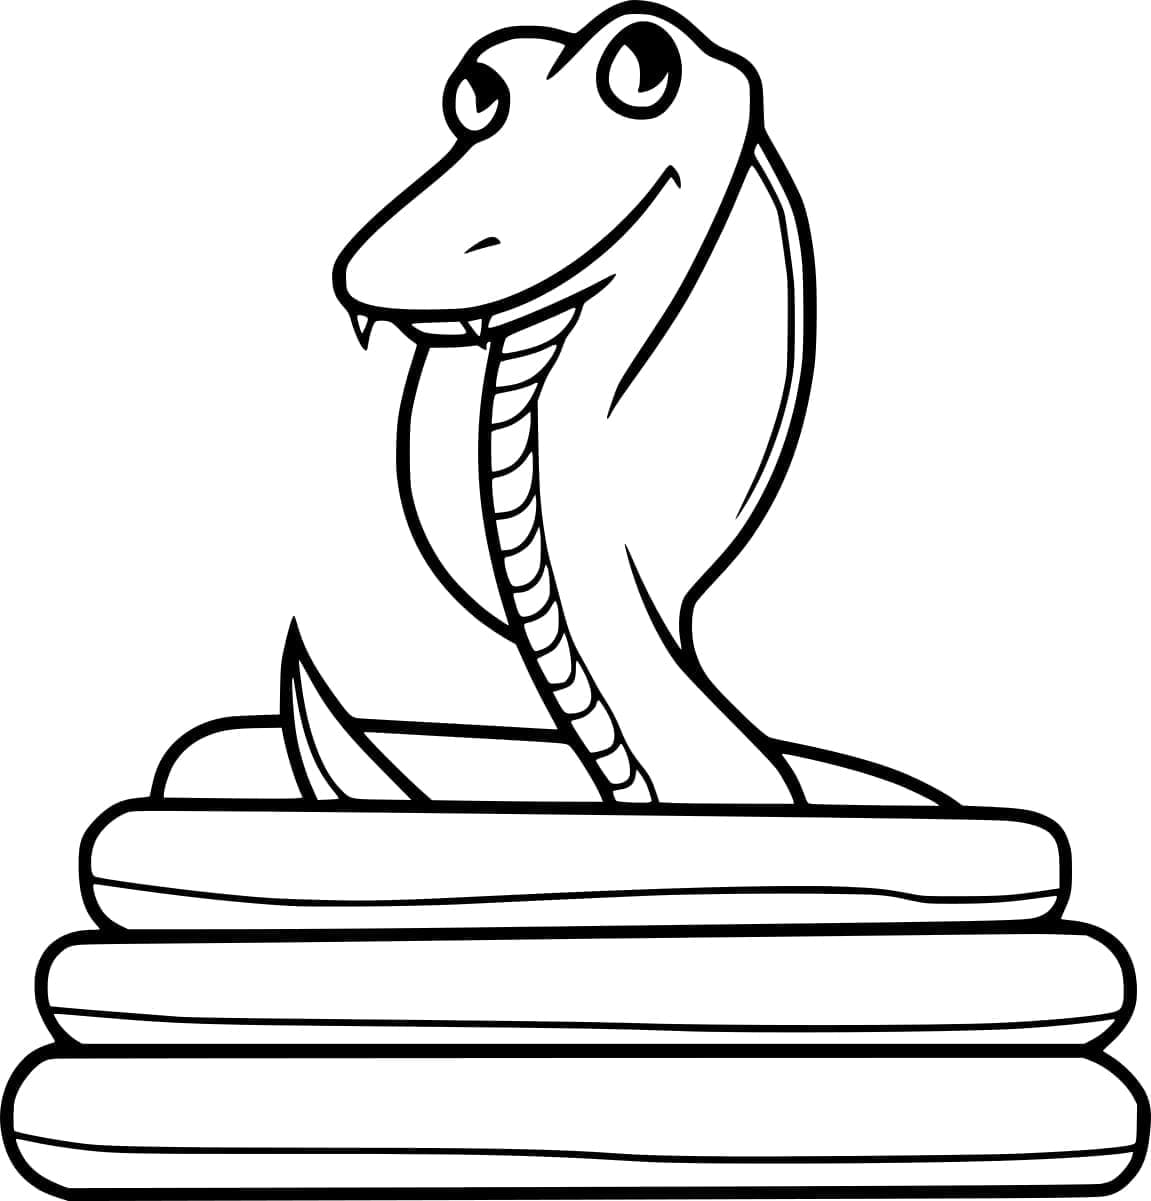 Cobra Souriant coloring page